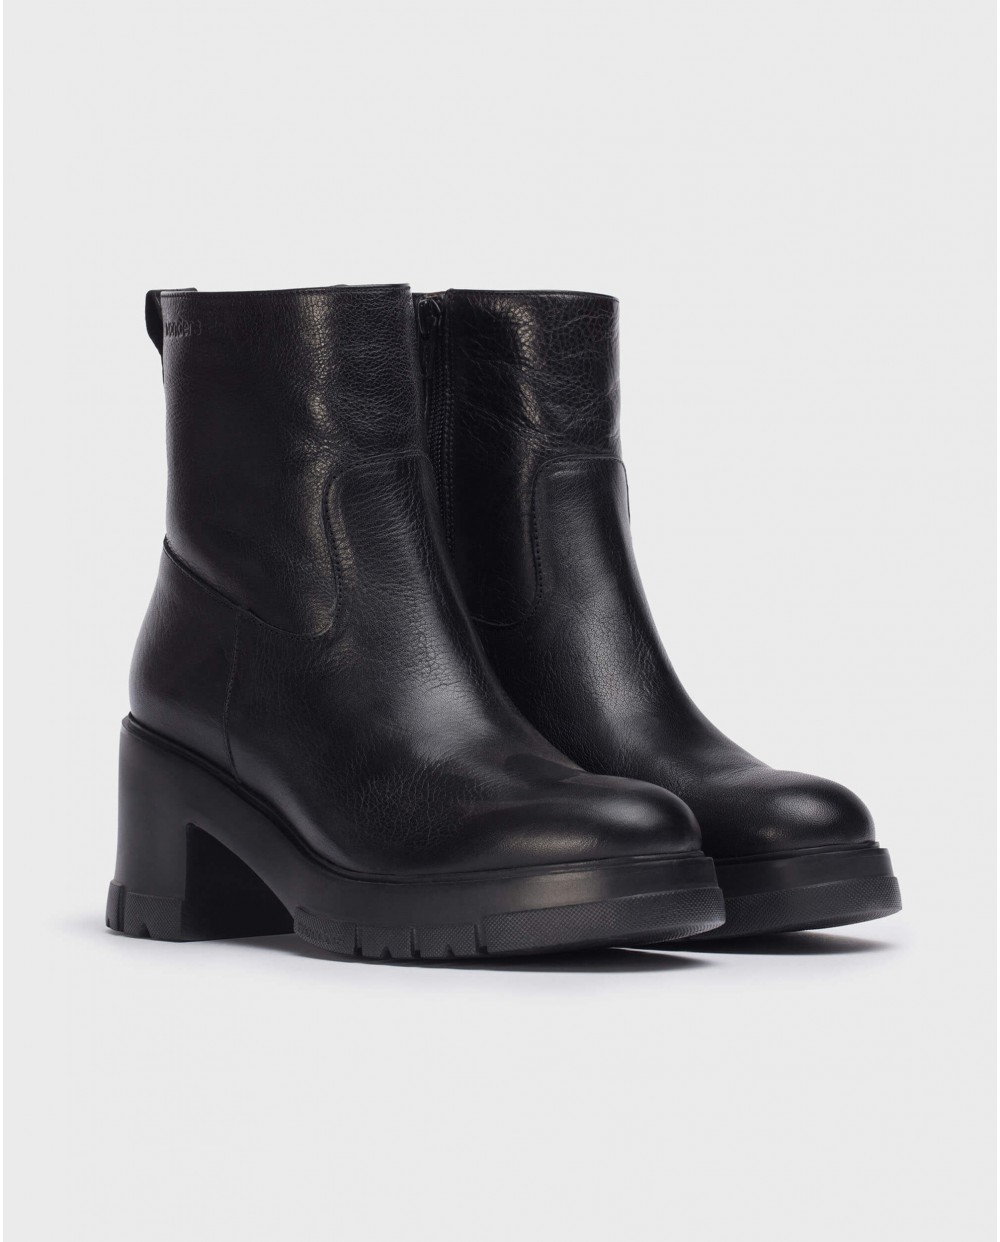 Black Moon Ankle Boot